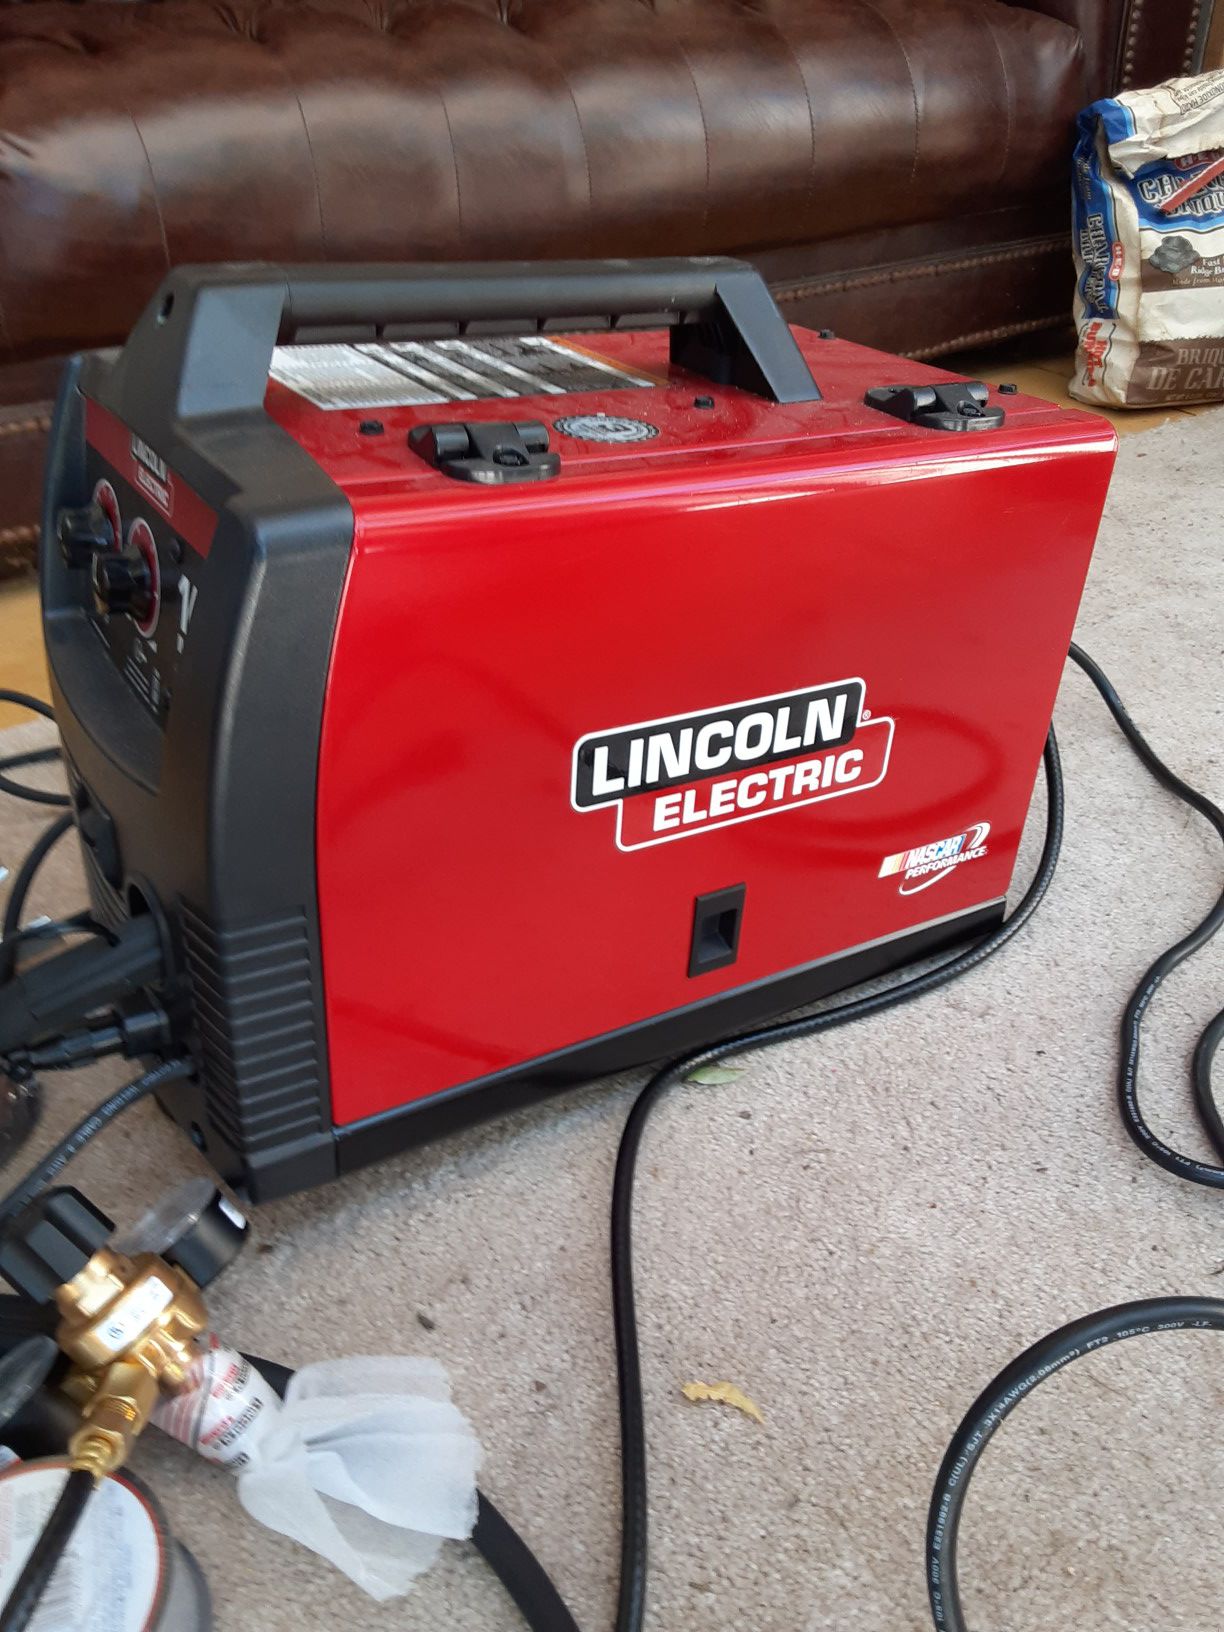 BRAND NEW! Lincoln electric welder